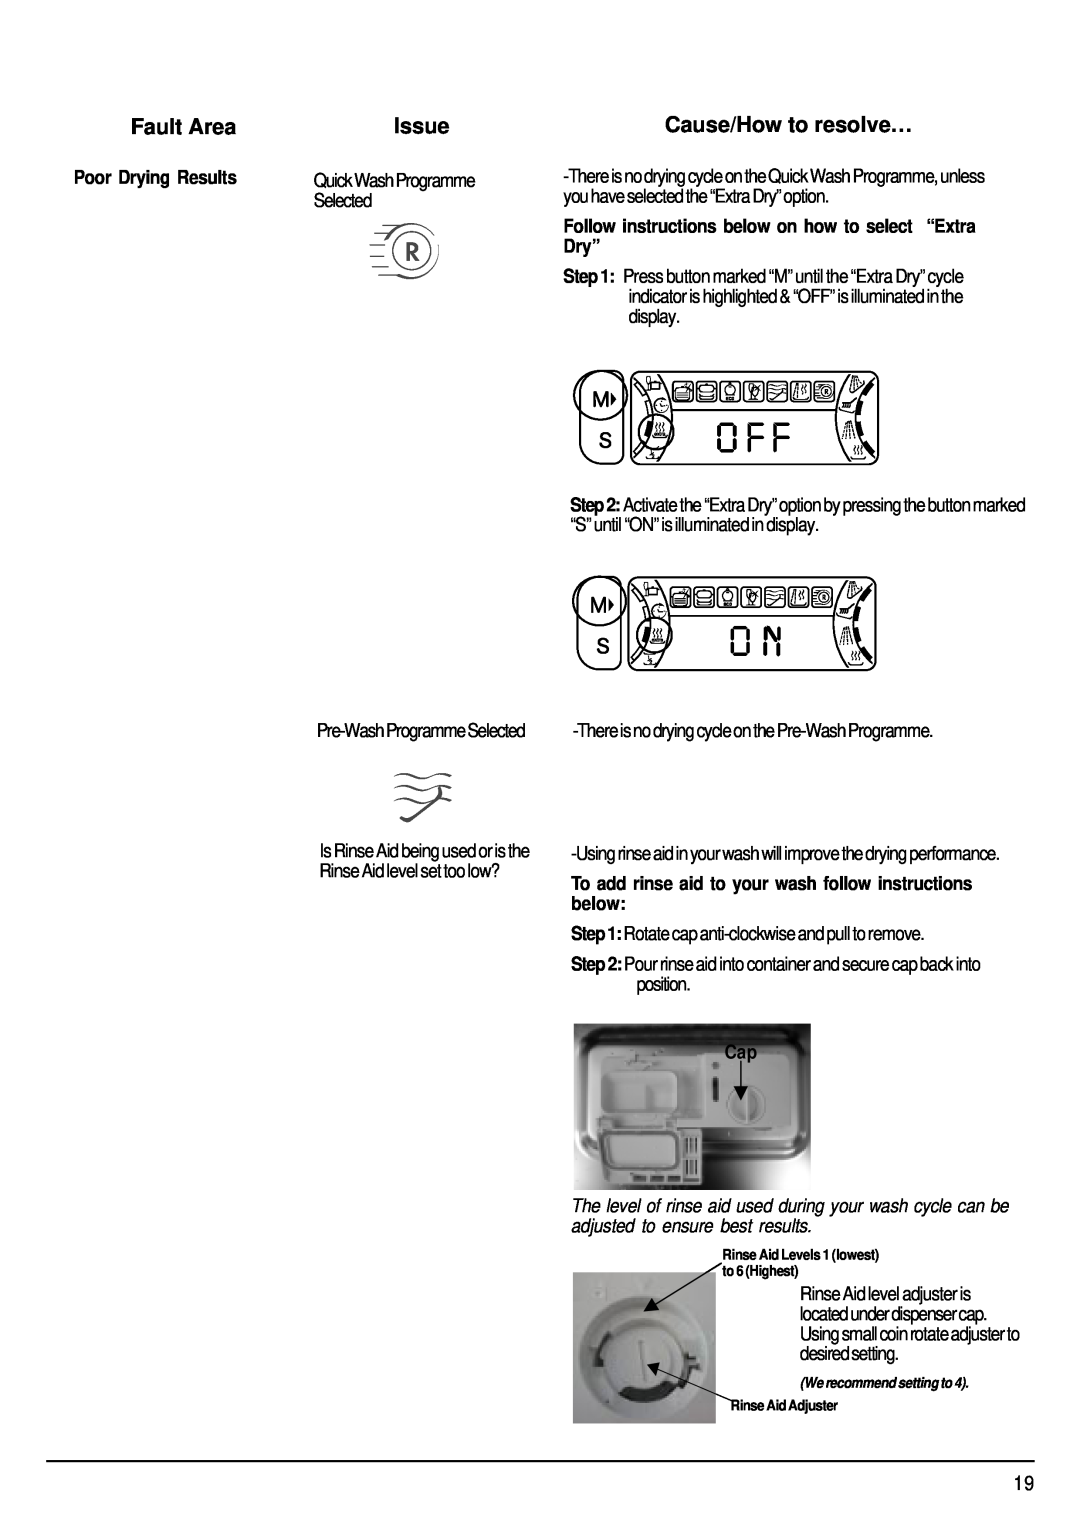 Hotpoint FDW80 manual Fault Area, Issue, Cause/How to resolve…, Poor Drying Results 